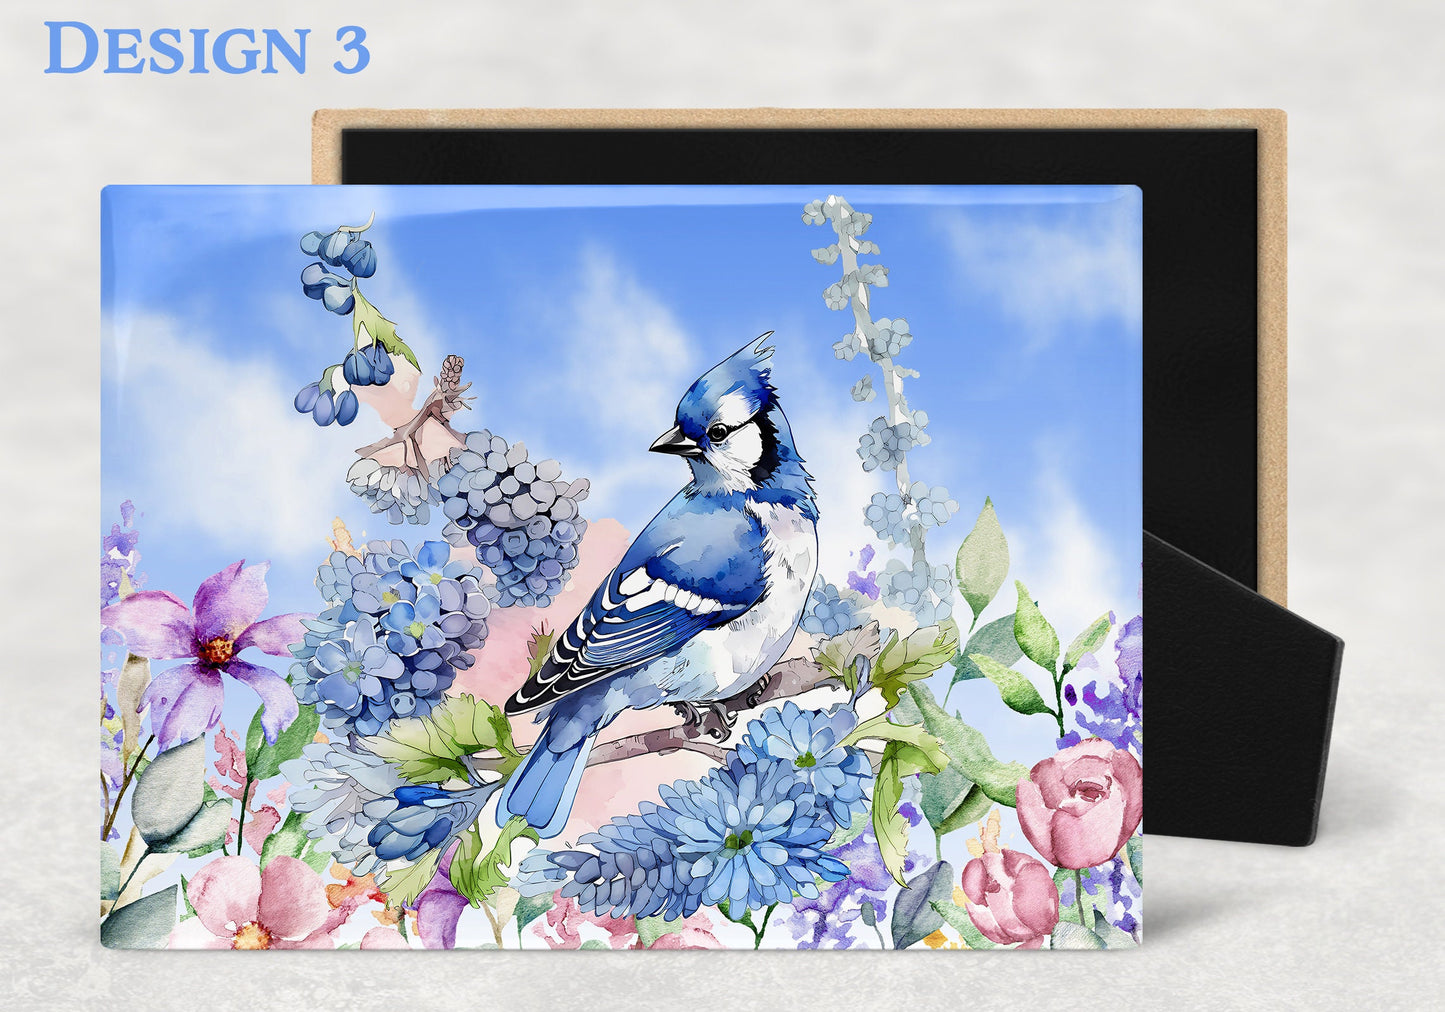 Watercolor Blue Jay and Flowers Art Decorative Ceramic Tile with Optional Easel Back - 6x8 inches - 3 Different Designs